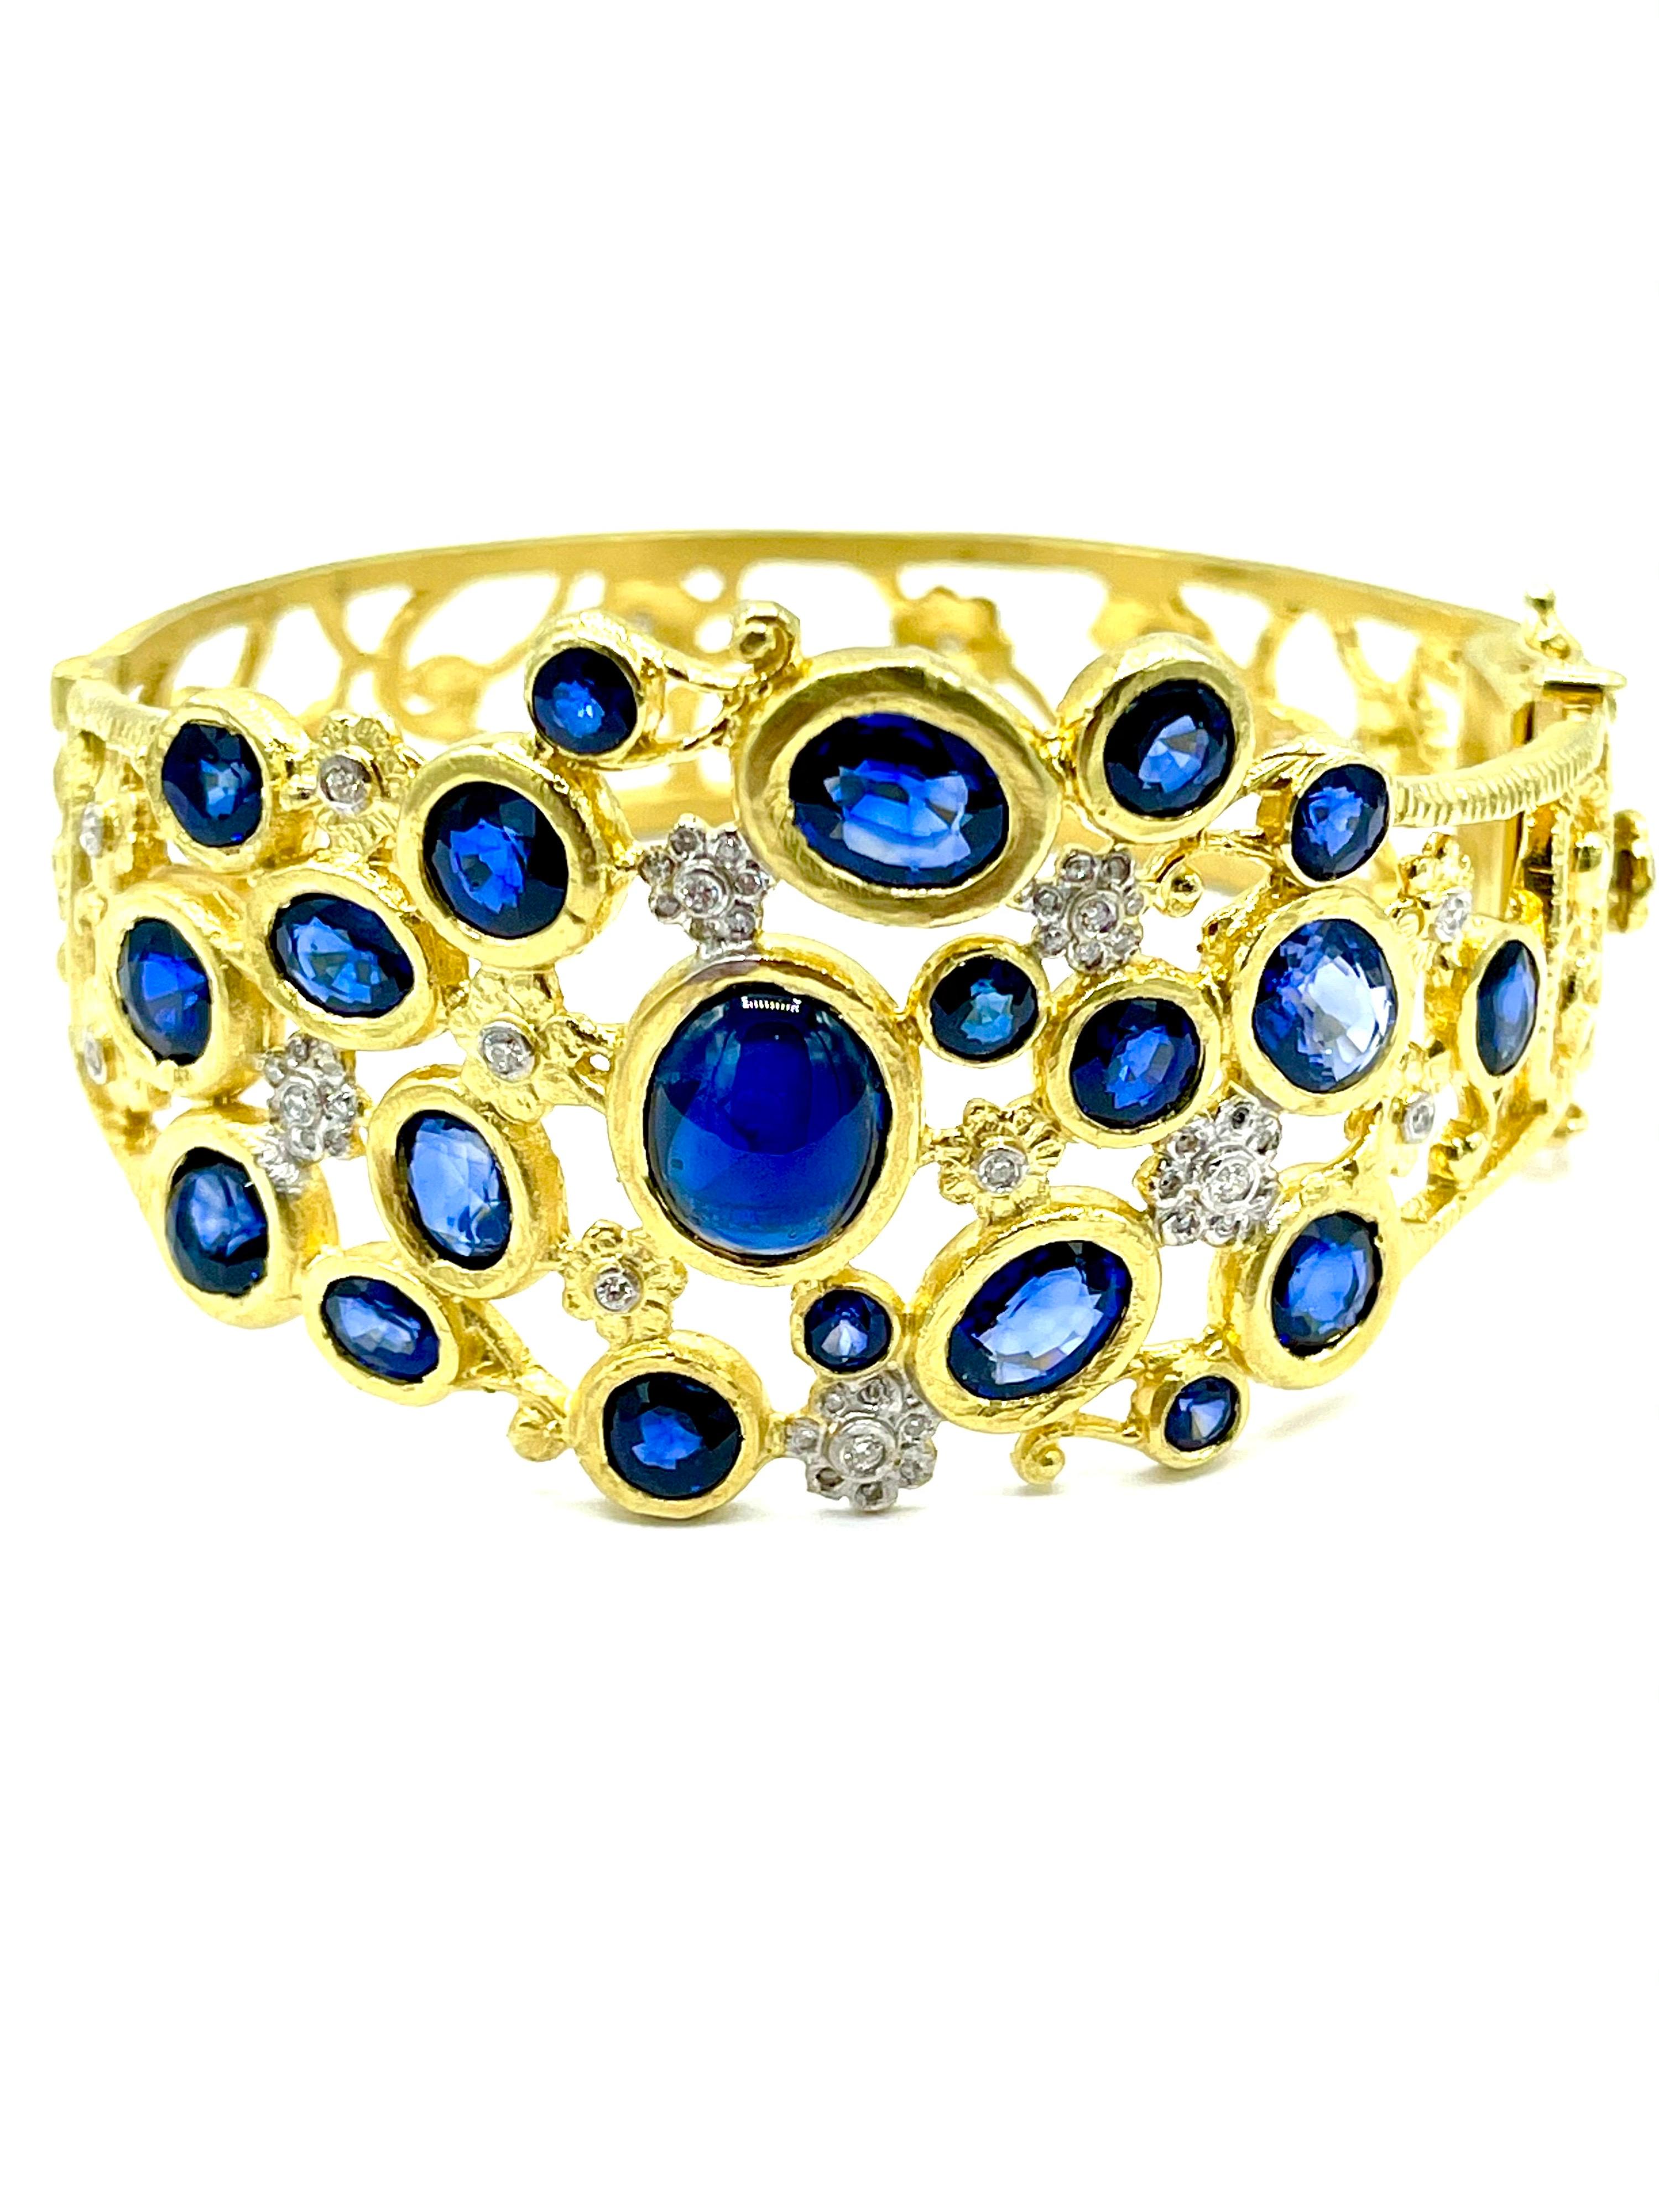 An absolutely stunning Tanya Farah Sapphire and Diamond bangle bracelet in 18K yellow gold.  The top portion of the bracelet has 21 bezel set Sapphires, one large cabochon, and 20 faceted round and oval shapes for a total of 29.70 carats.  The round